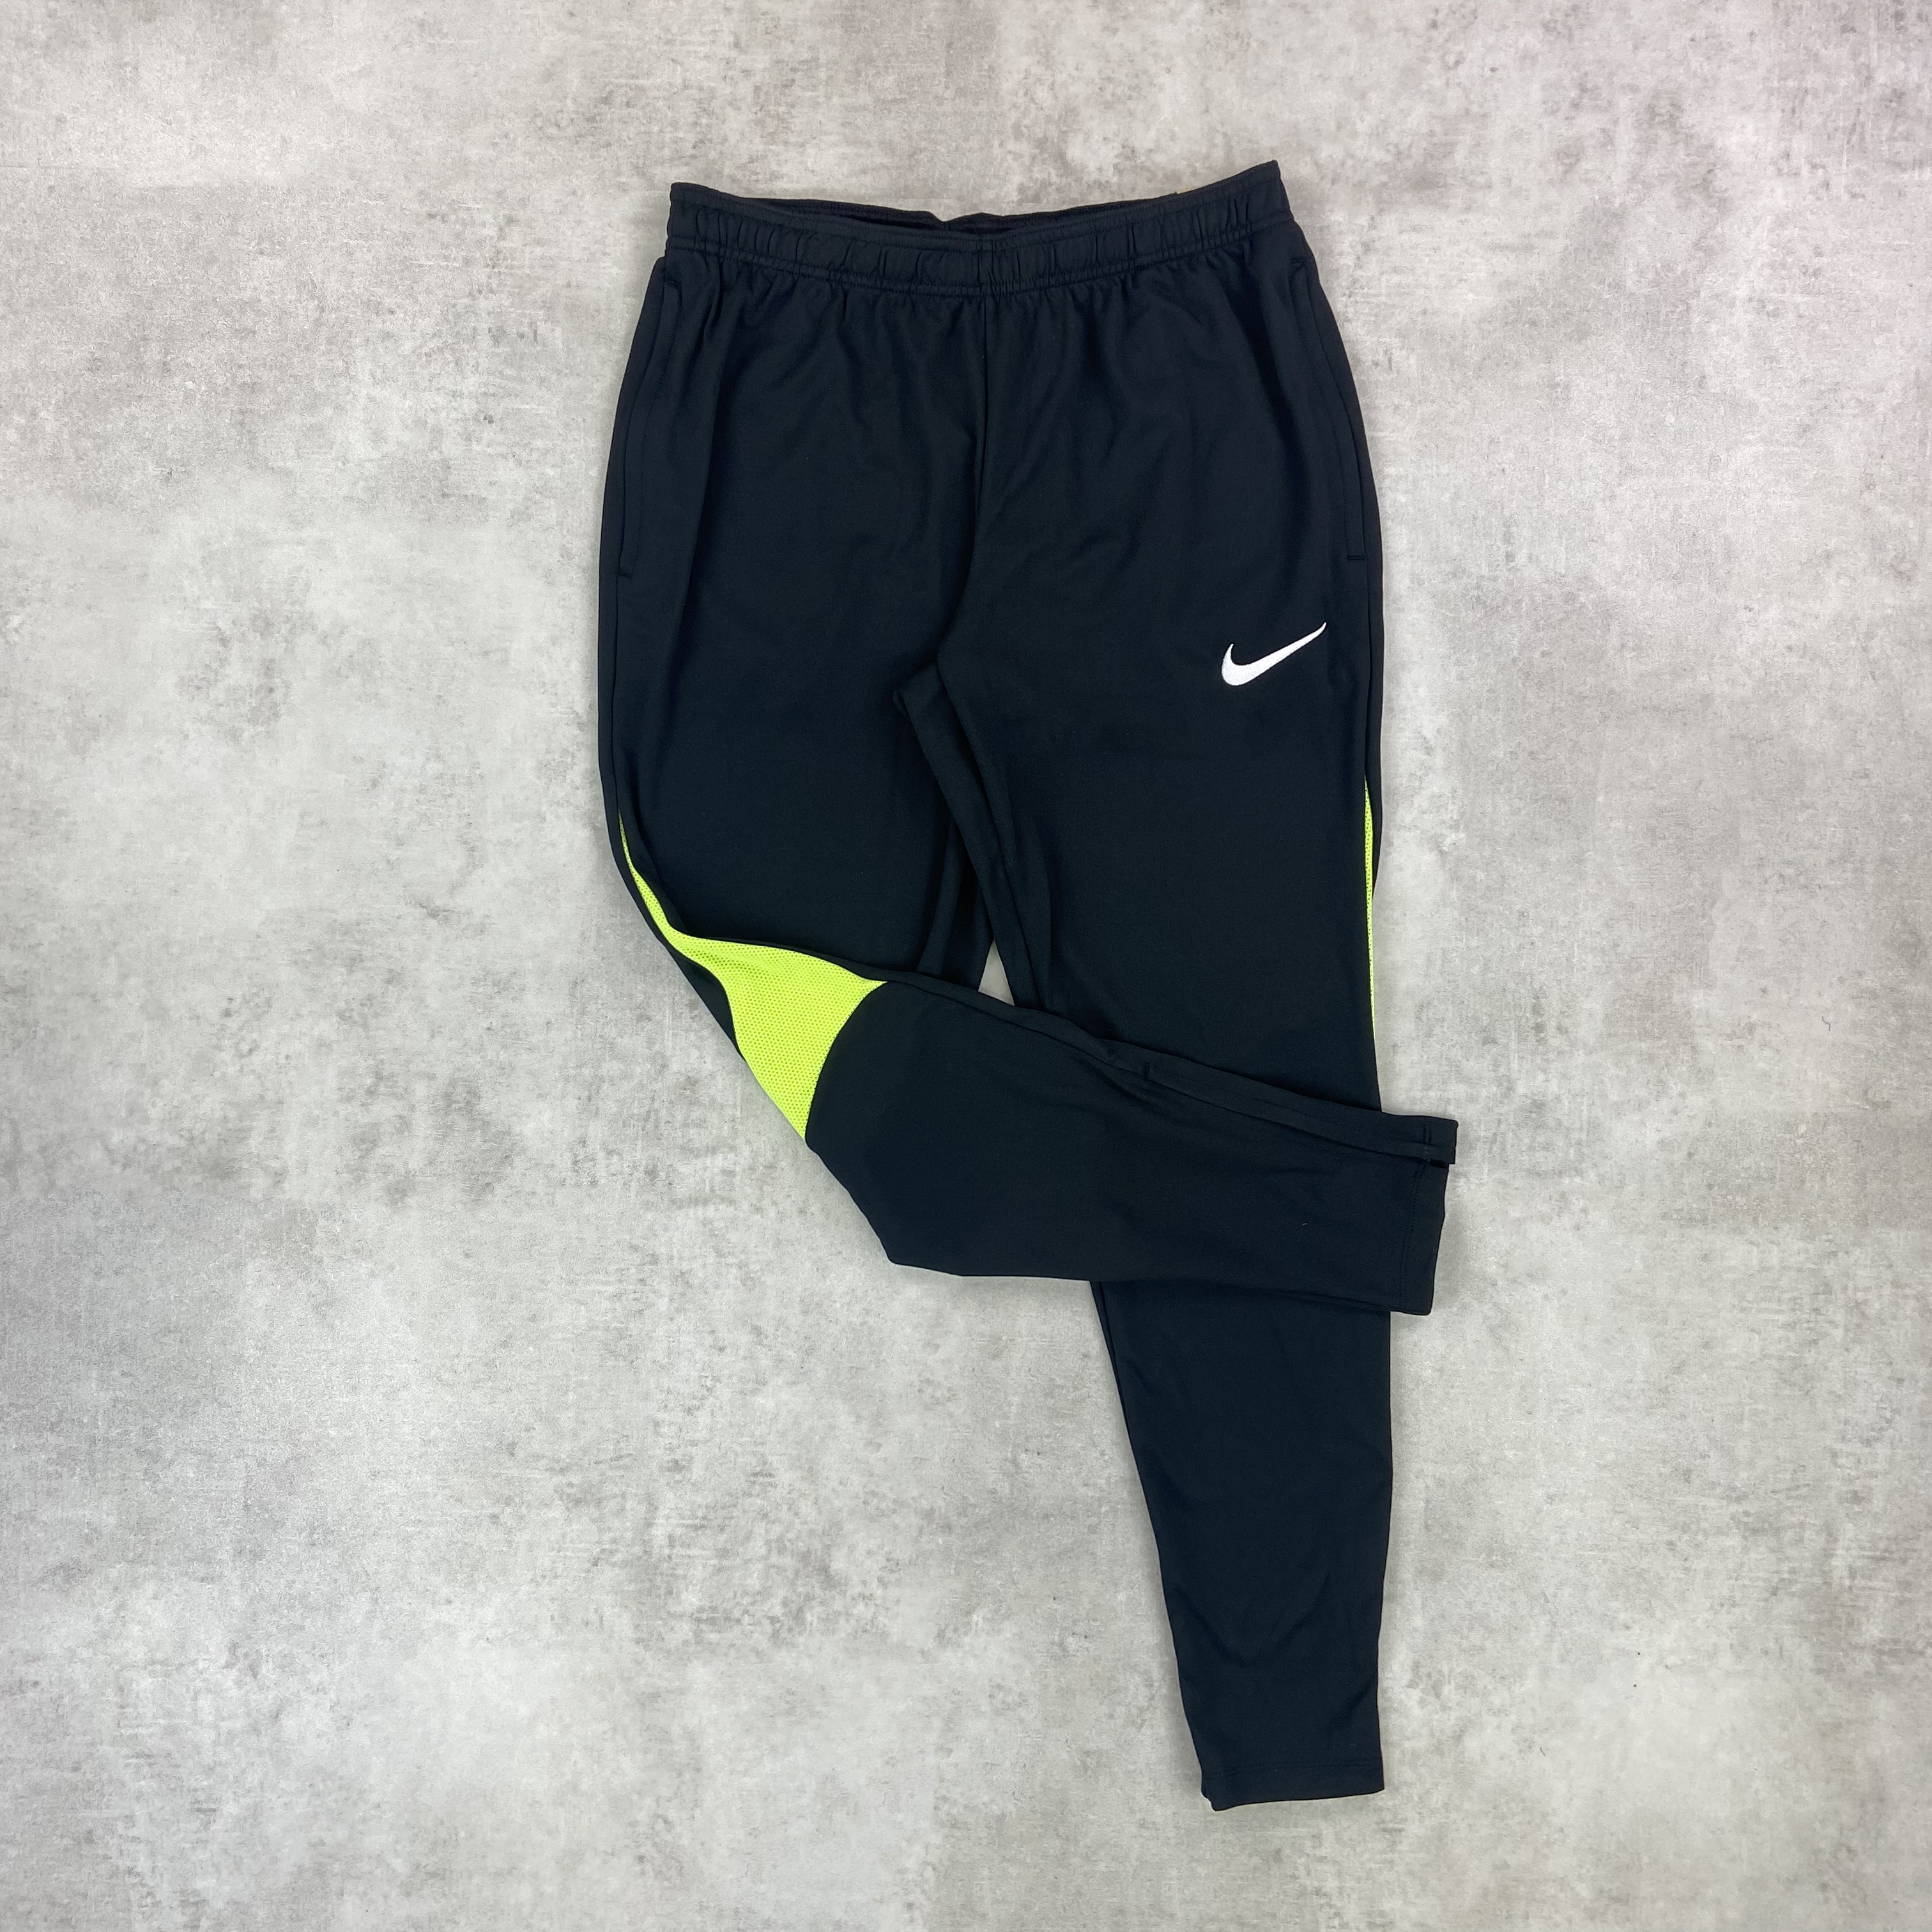 Nike Dri-Fit Athletic Pants Women's Dark Gray New with Tags XL